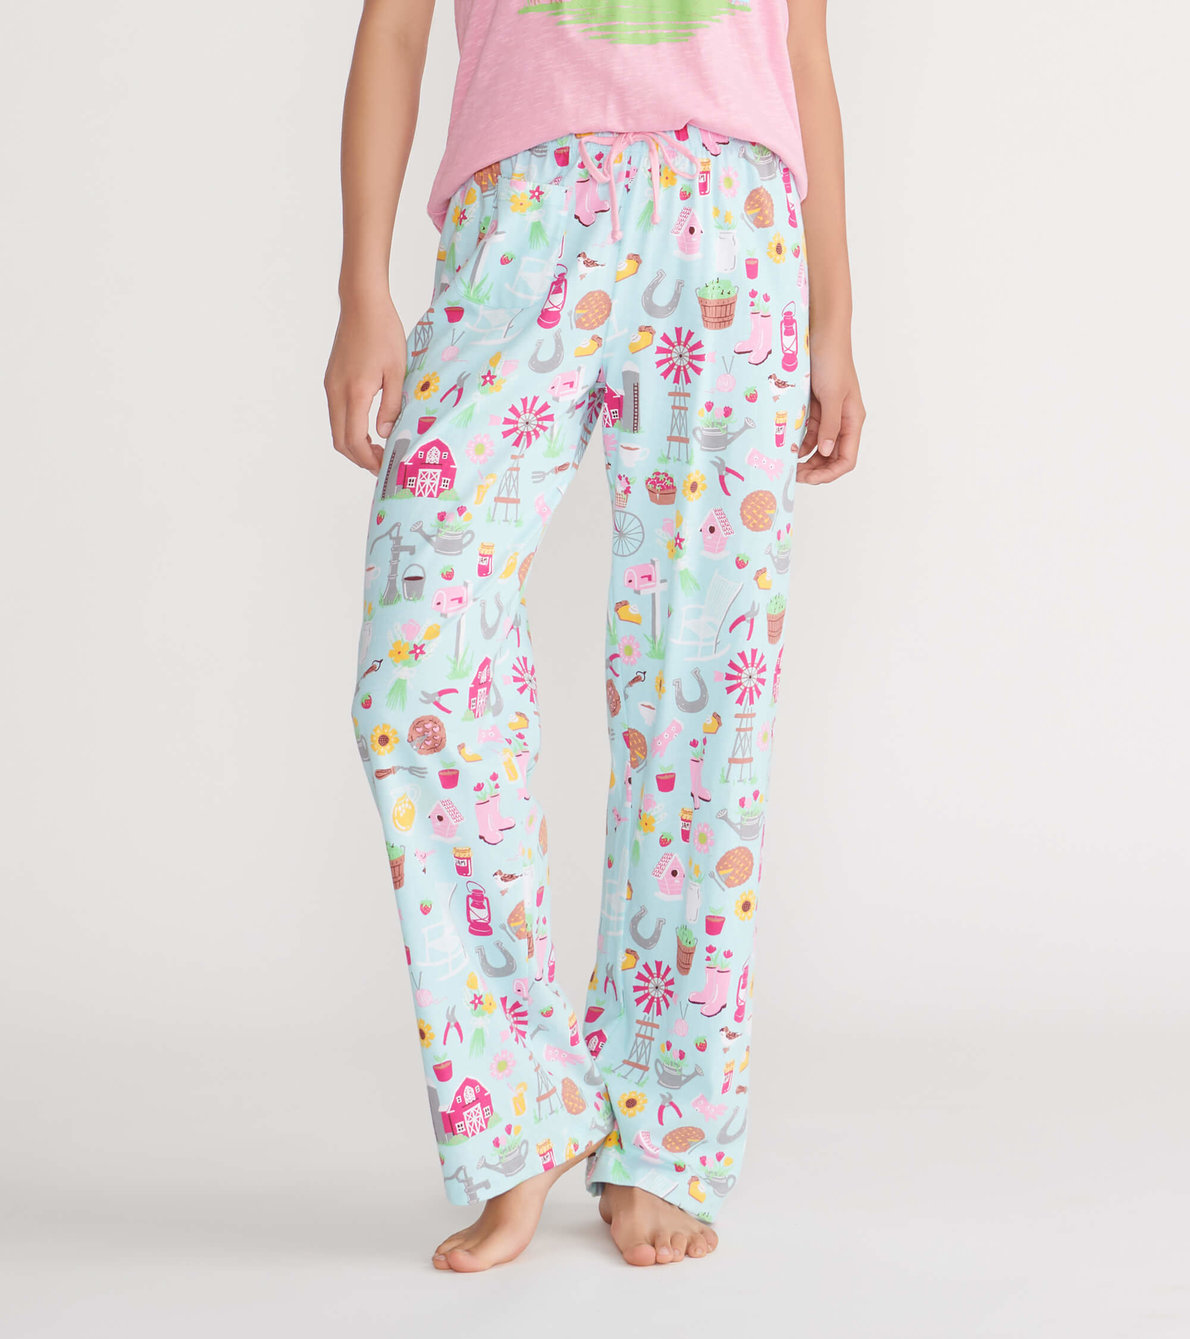 View larger image of Country Living Women's Jersey Pajama Pants